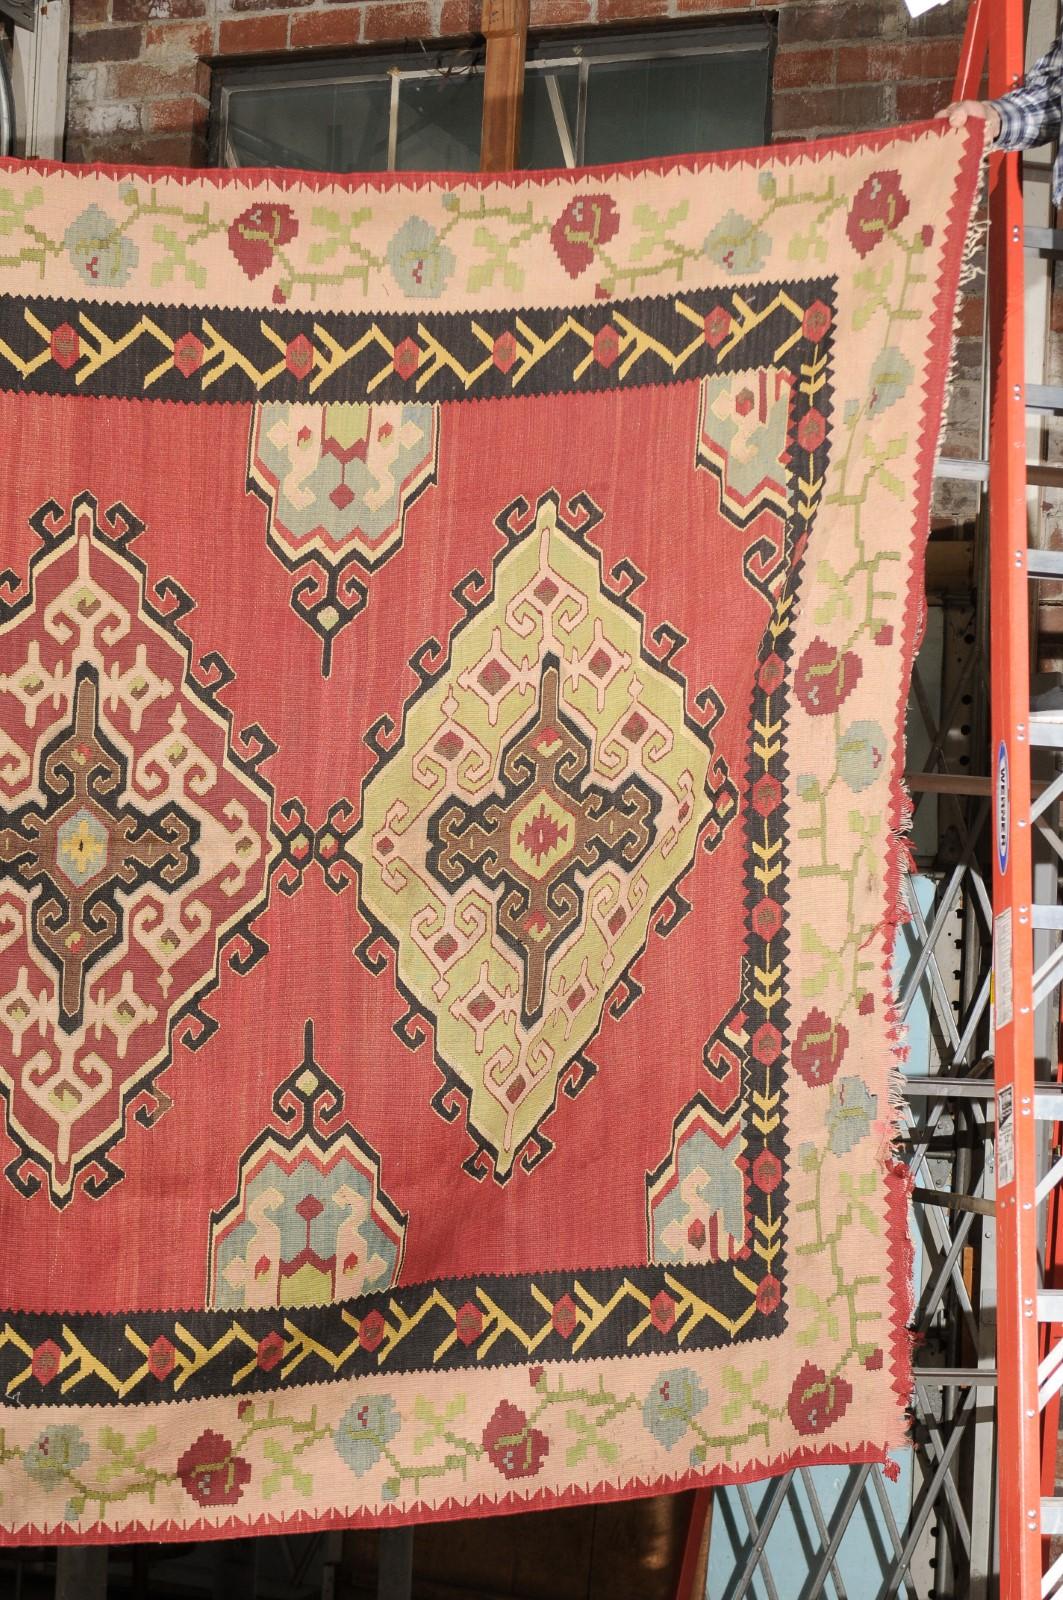 Flatweave Area Rug in Reds, Tans, & Black featuring Floral Border In Fair Condition For Sale In Atlanta, GA